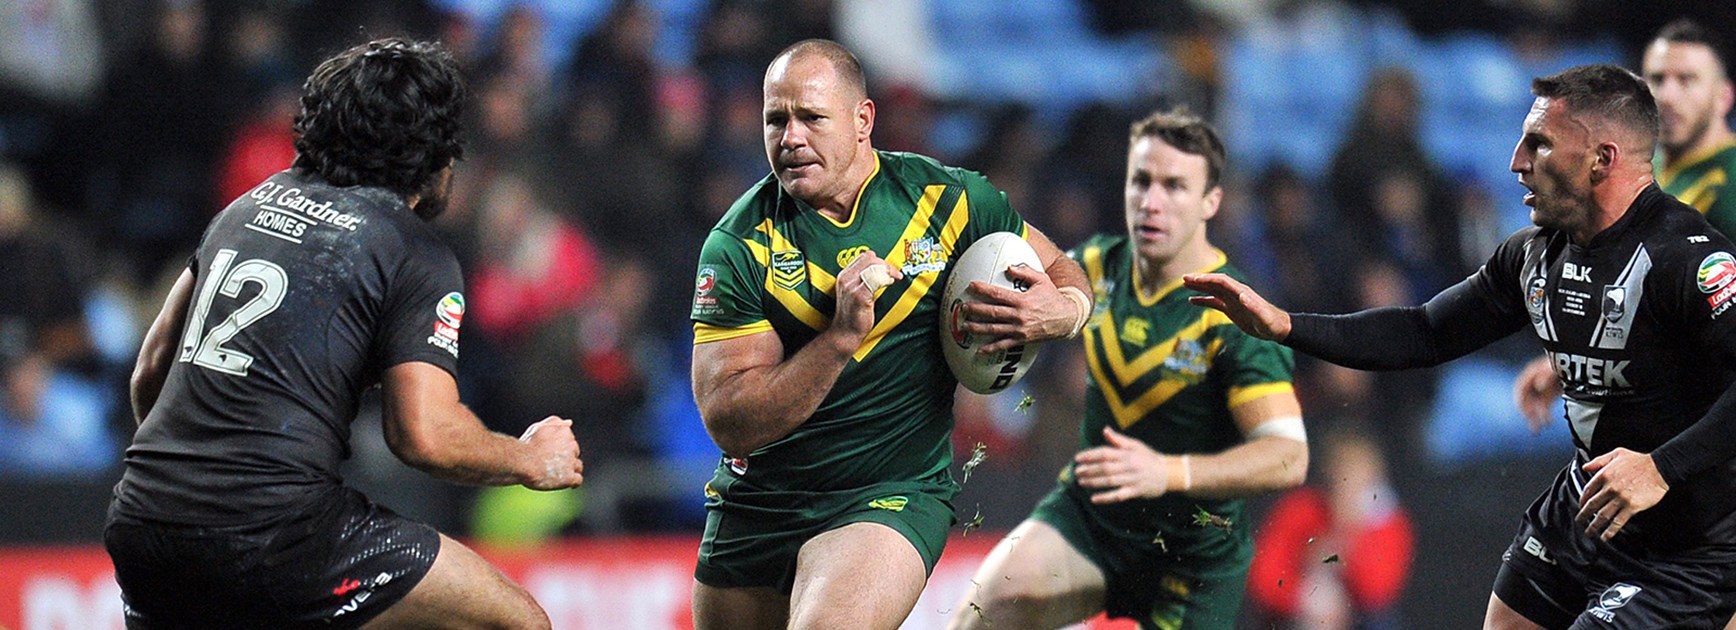 Kangaroos prop Matt Scott in action against the Kiwis in the Four Nations clash in Coventry.